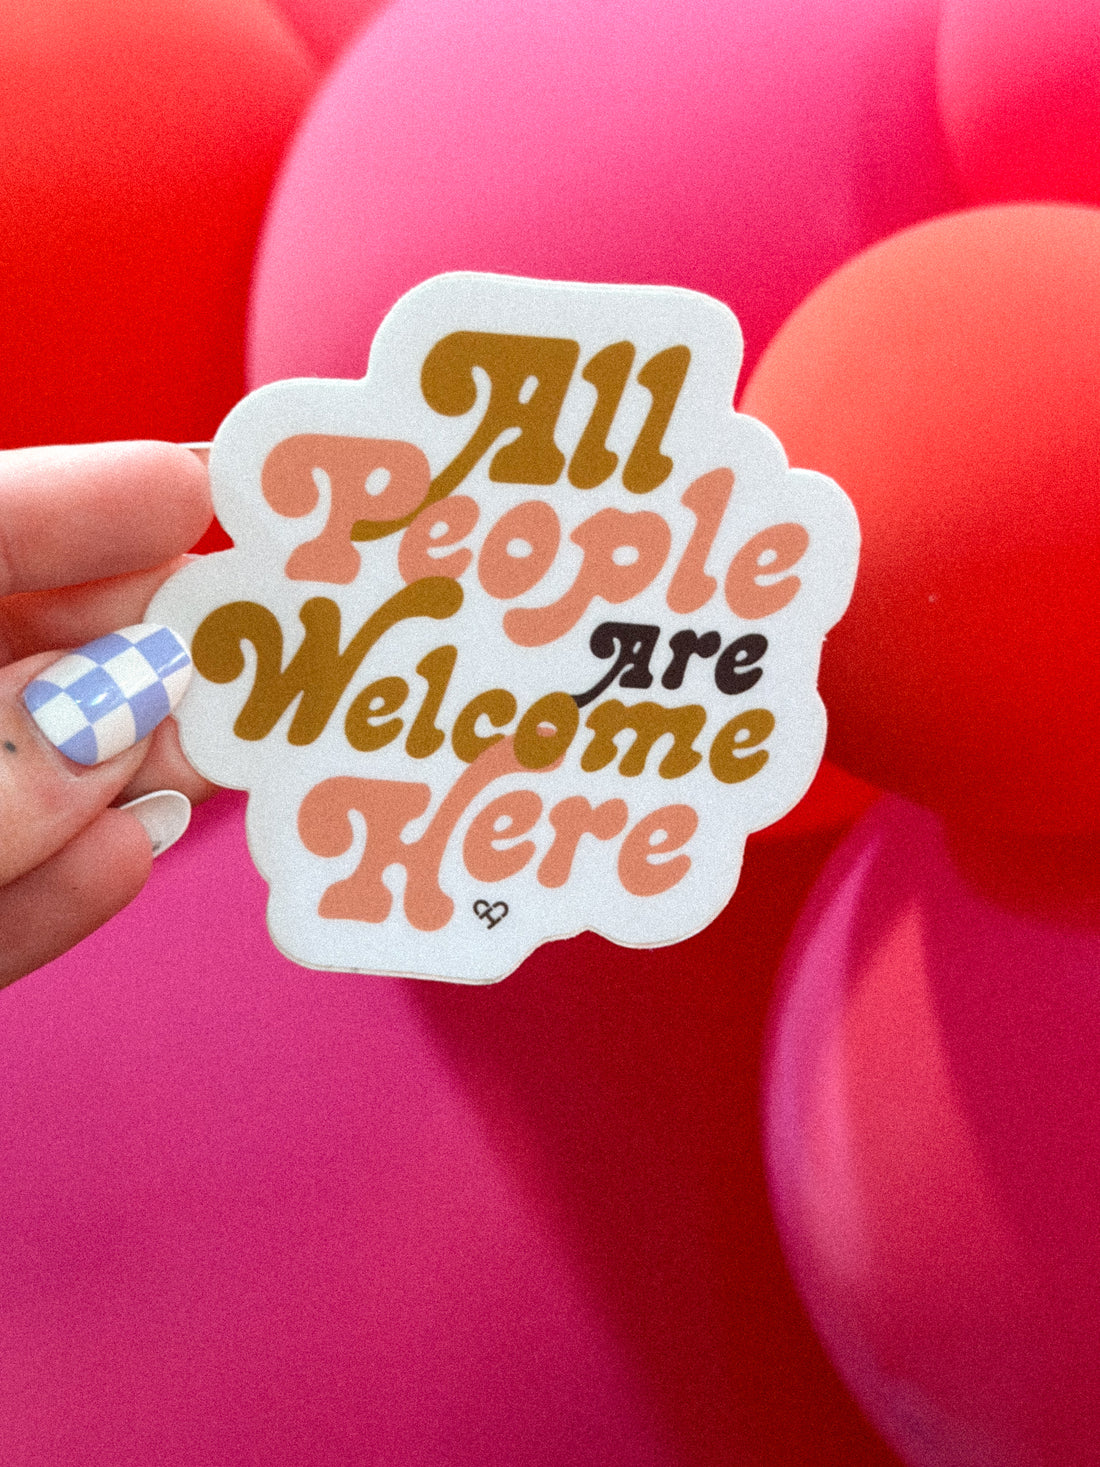 “All people are welcome here” Vinyl sticker